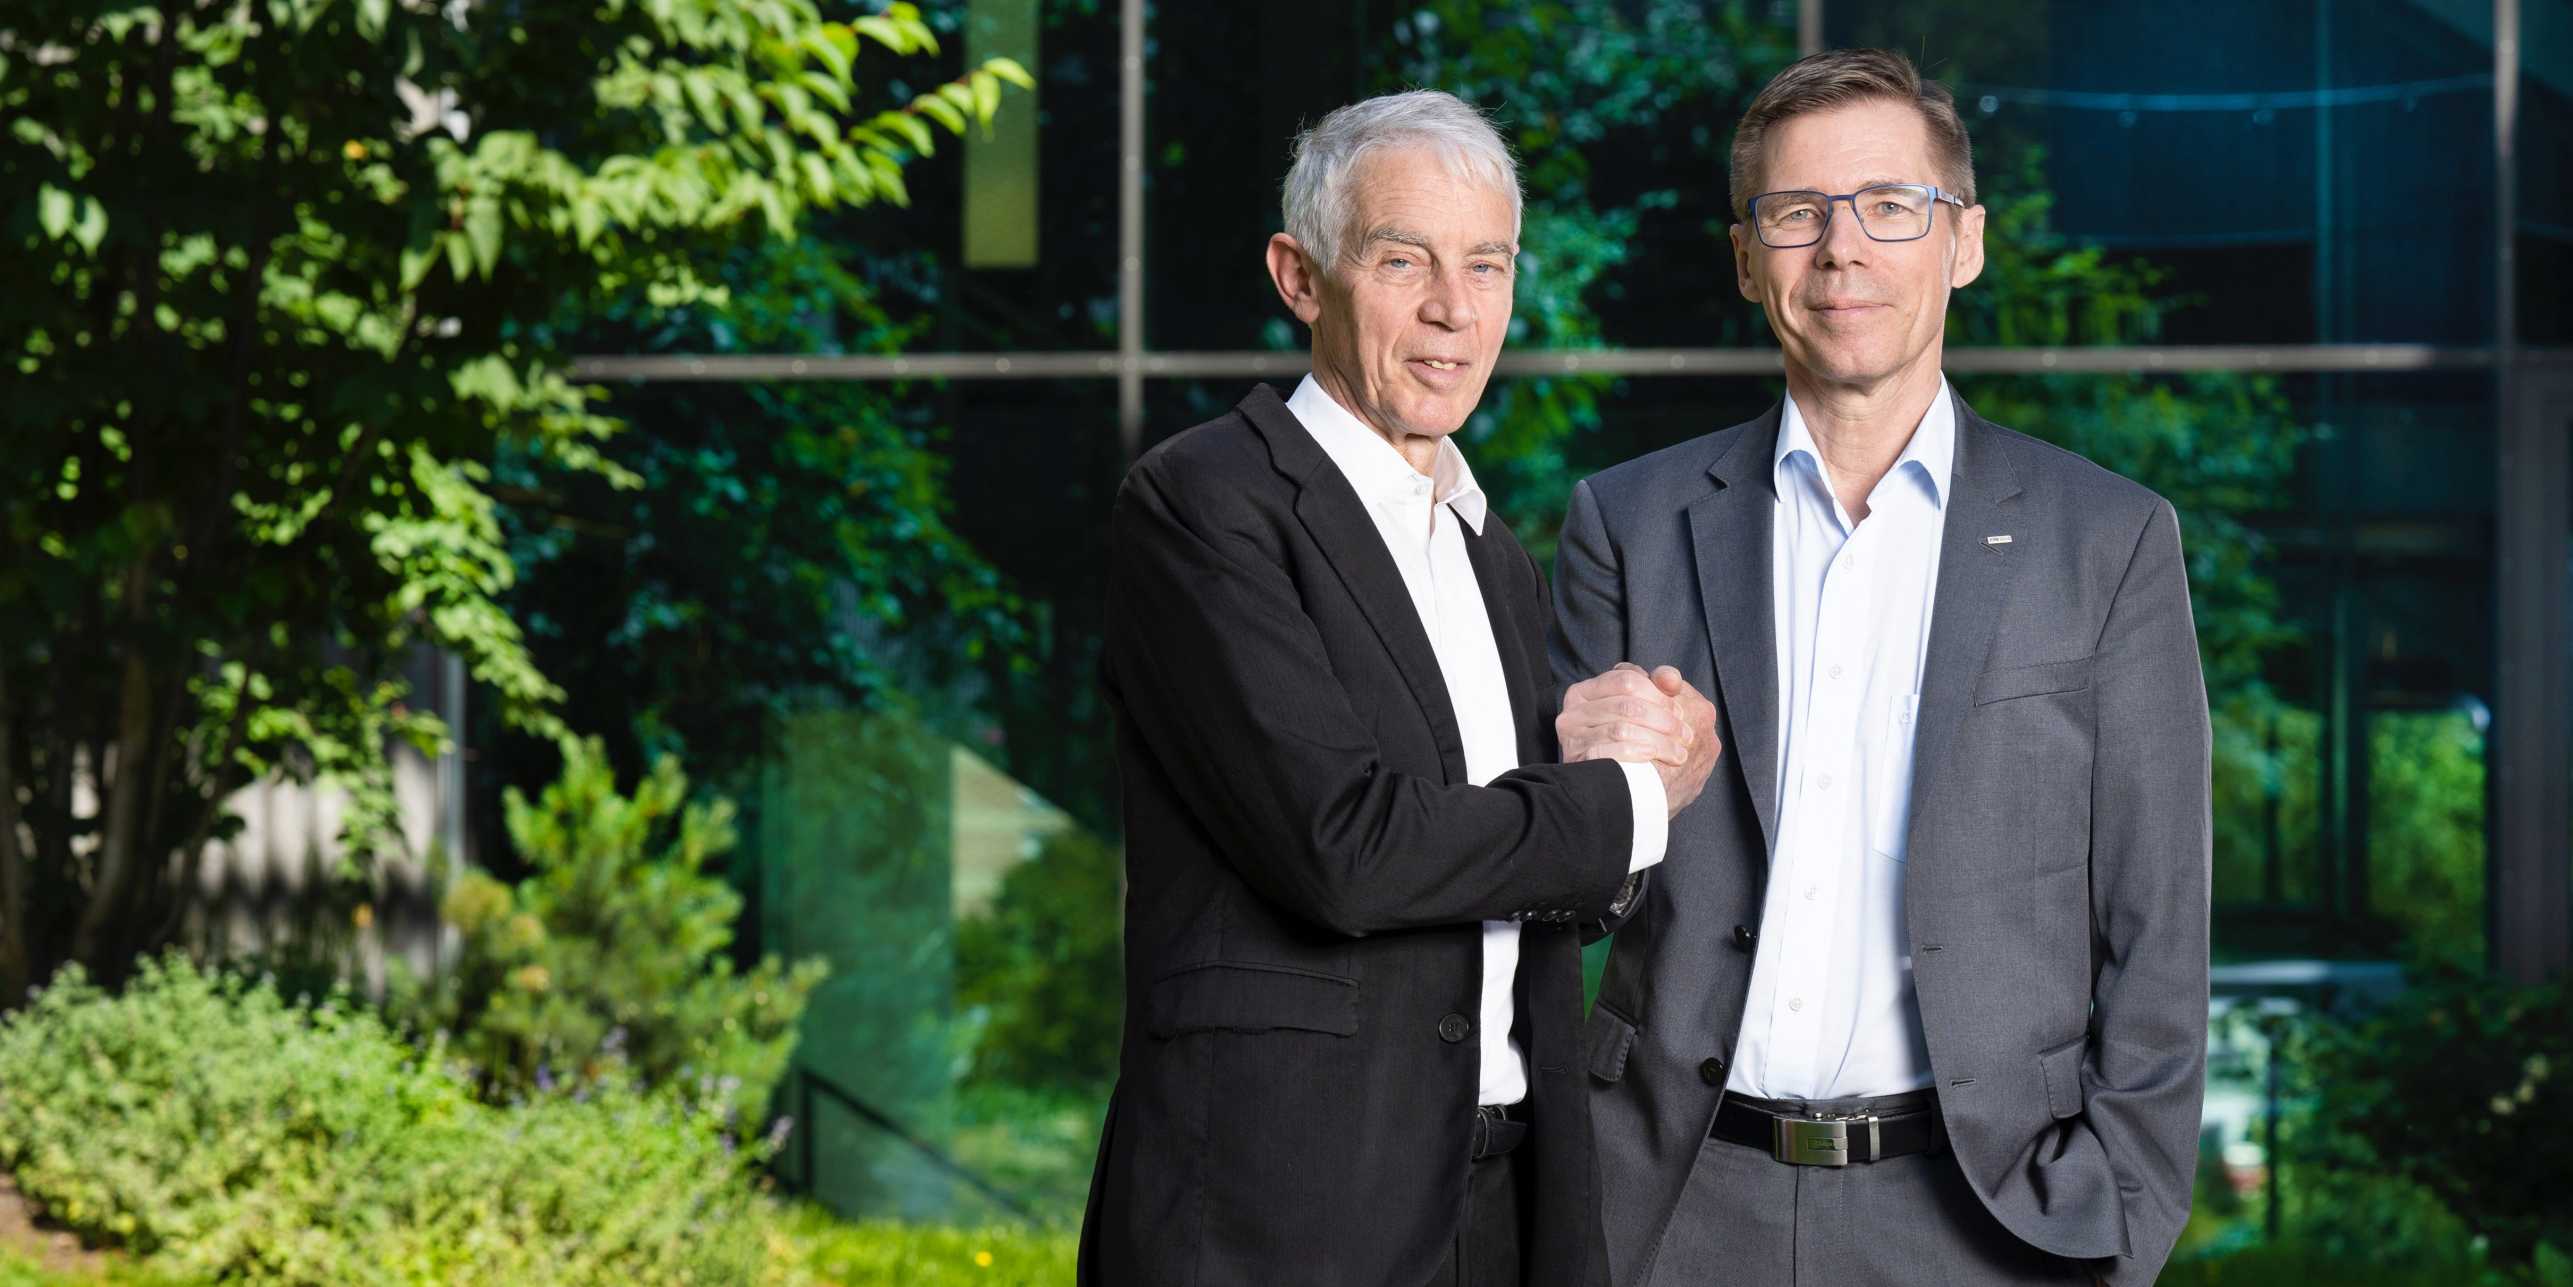 ETH President Joël Mesot (right) and EPFL President Martin Vetterli (left) shaking hands. Link to news article: ETH Zurich and EPFL launch a green energy coalition.